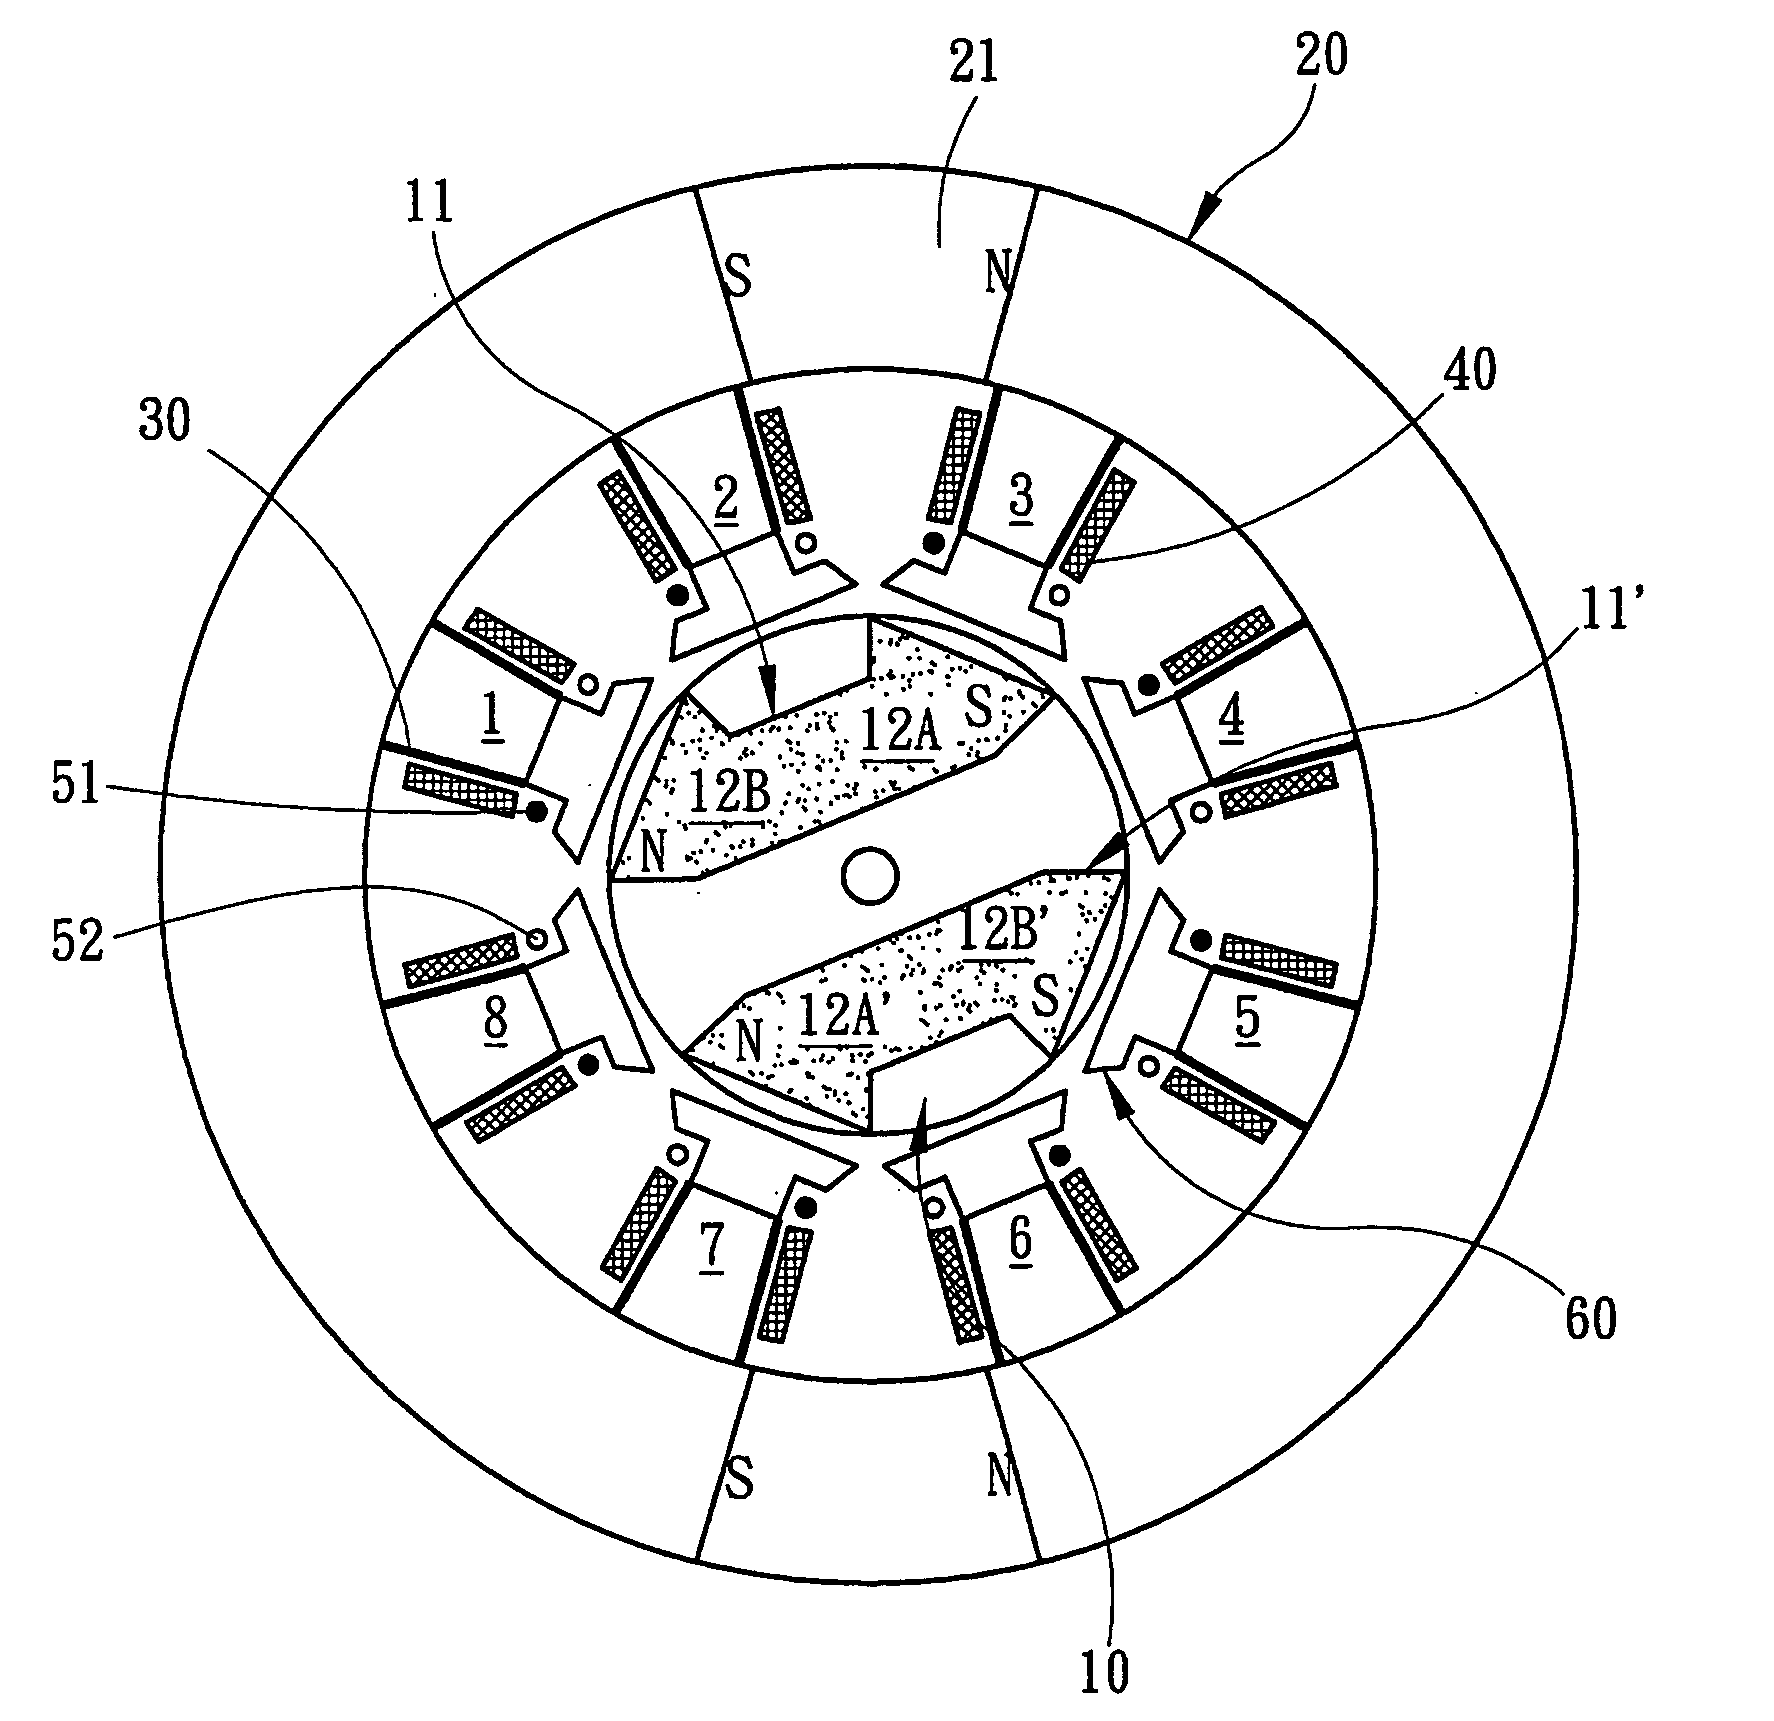 Reciprocating and rotary magnetic refrigeration apparatus